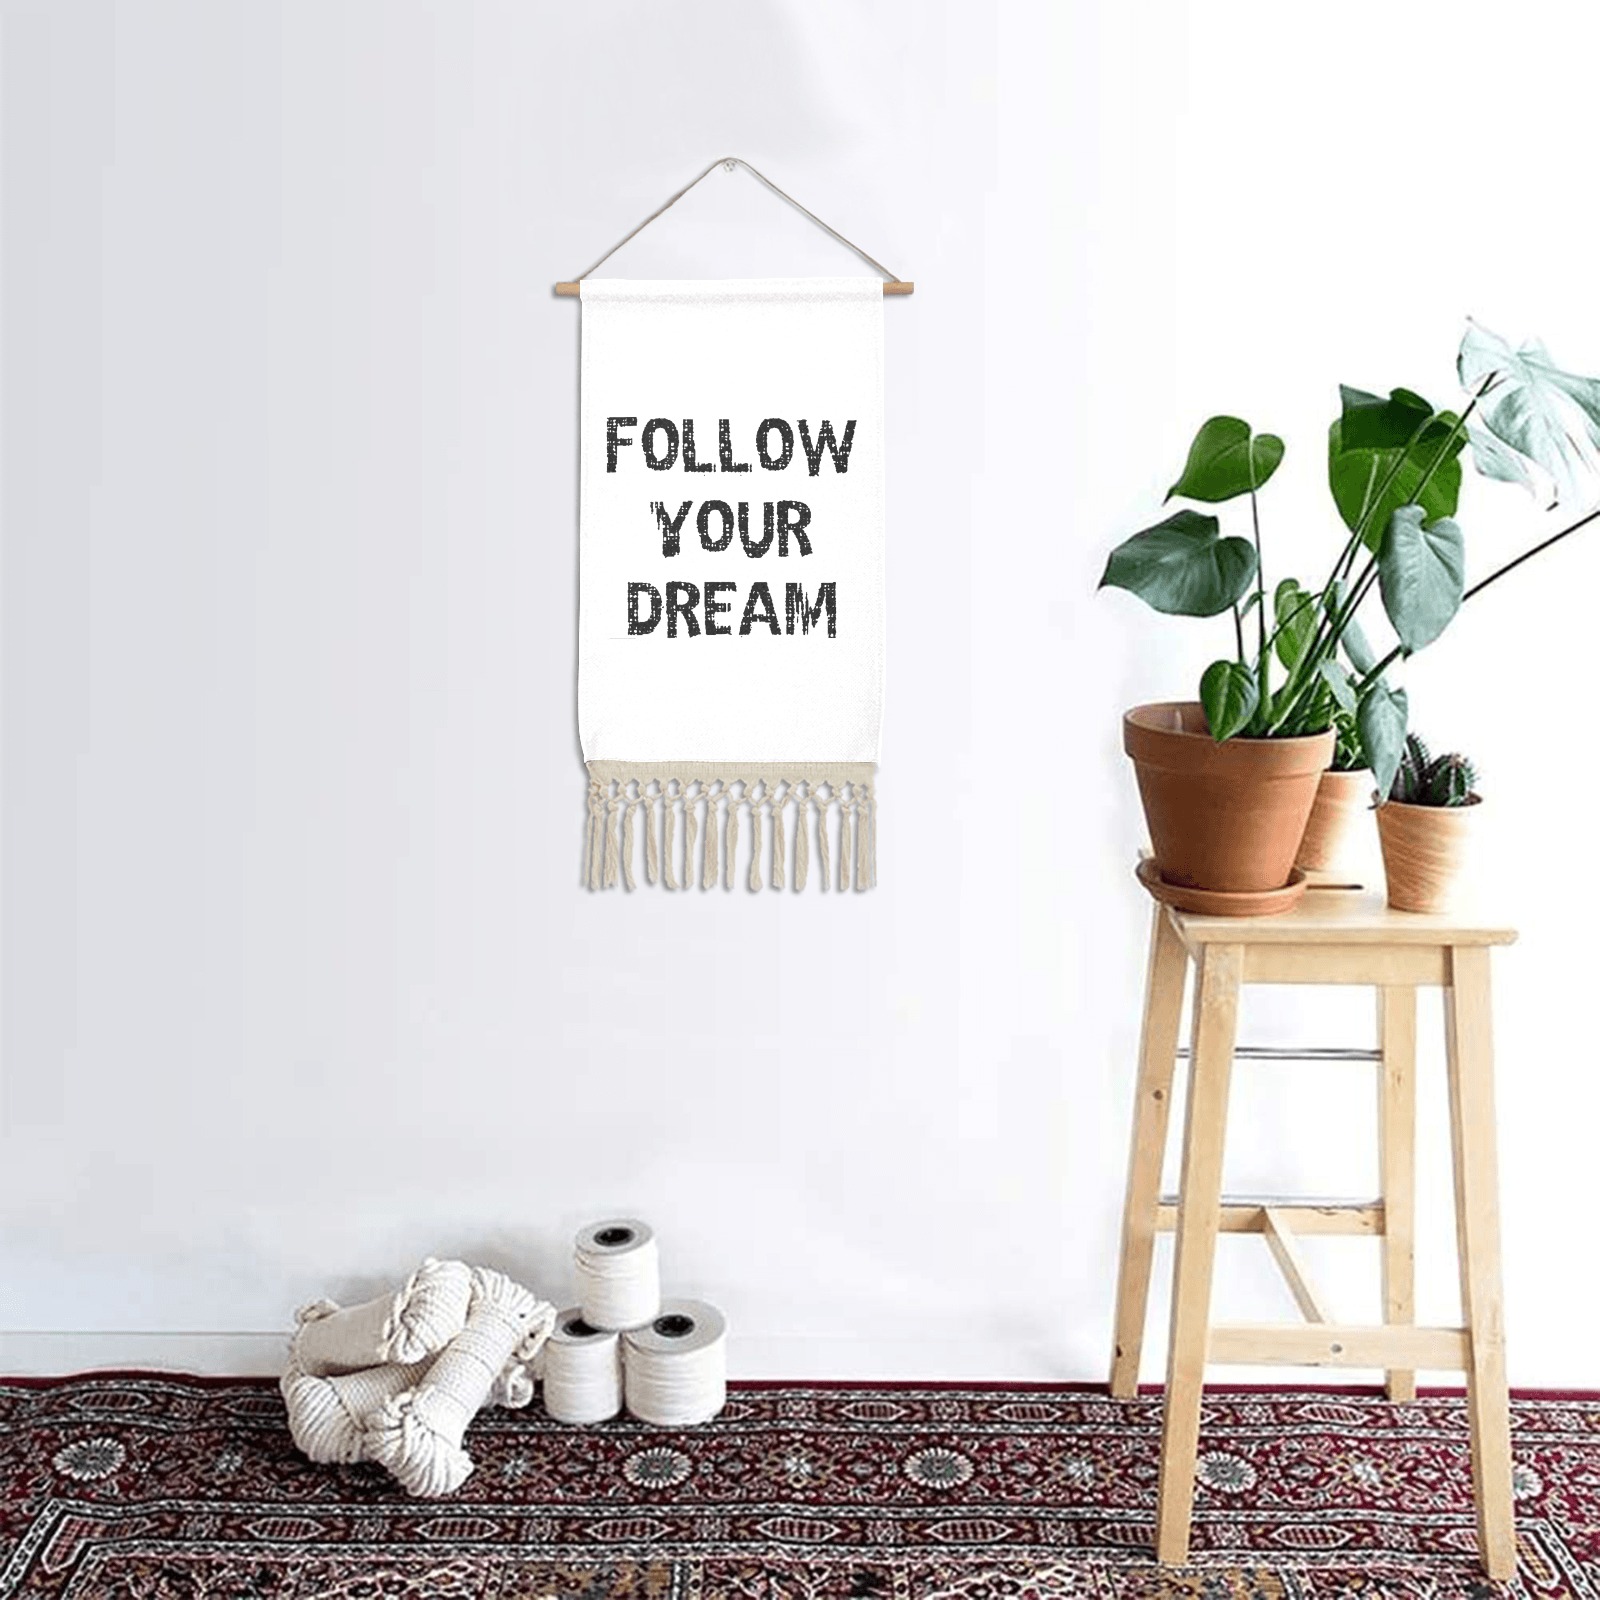 Follow your dream stylized black text. Linen Hanging Poster